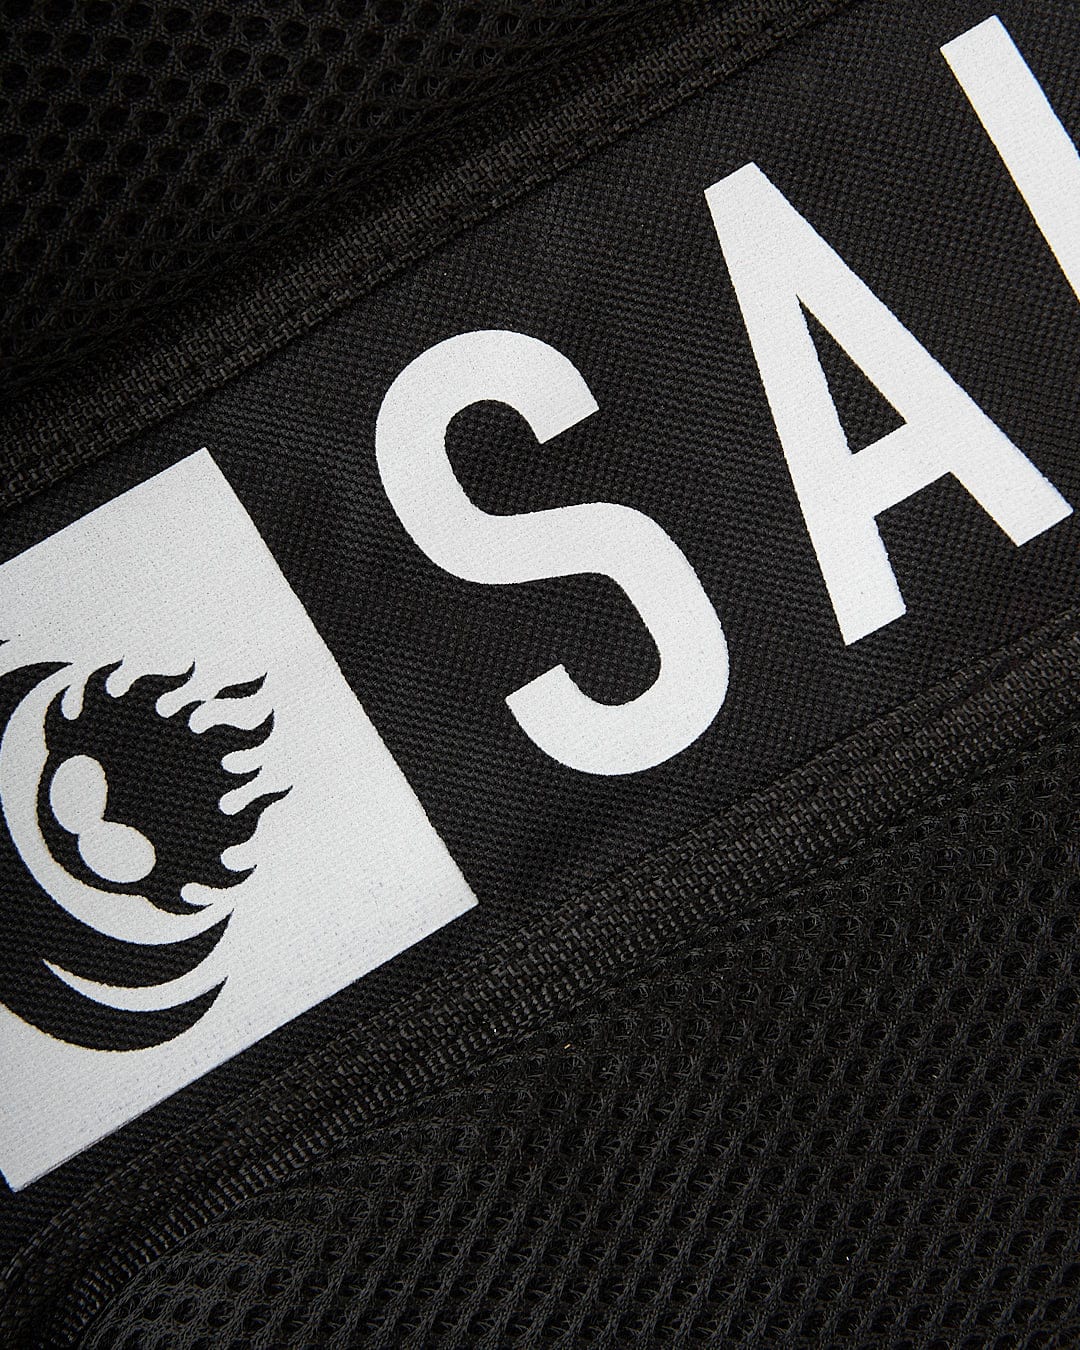 A close up of a Saltrock Cyclone - Urban Backpack - Black with a logo on it.